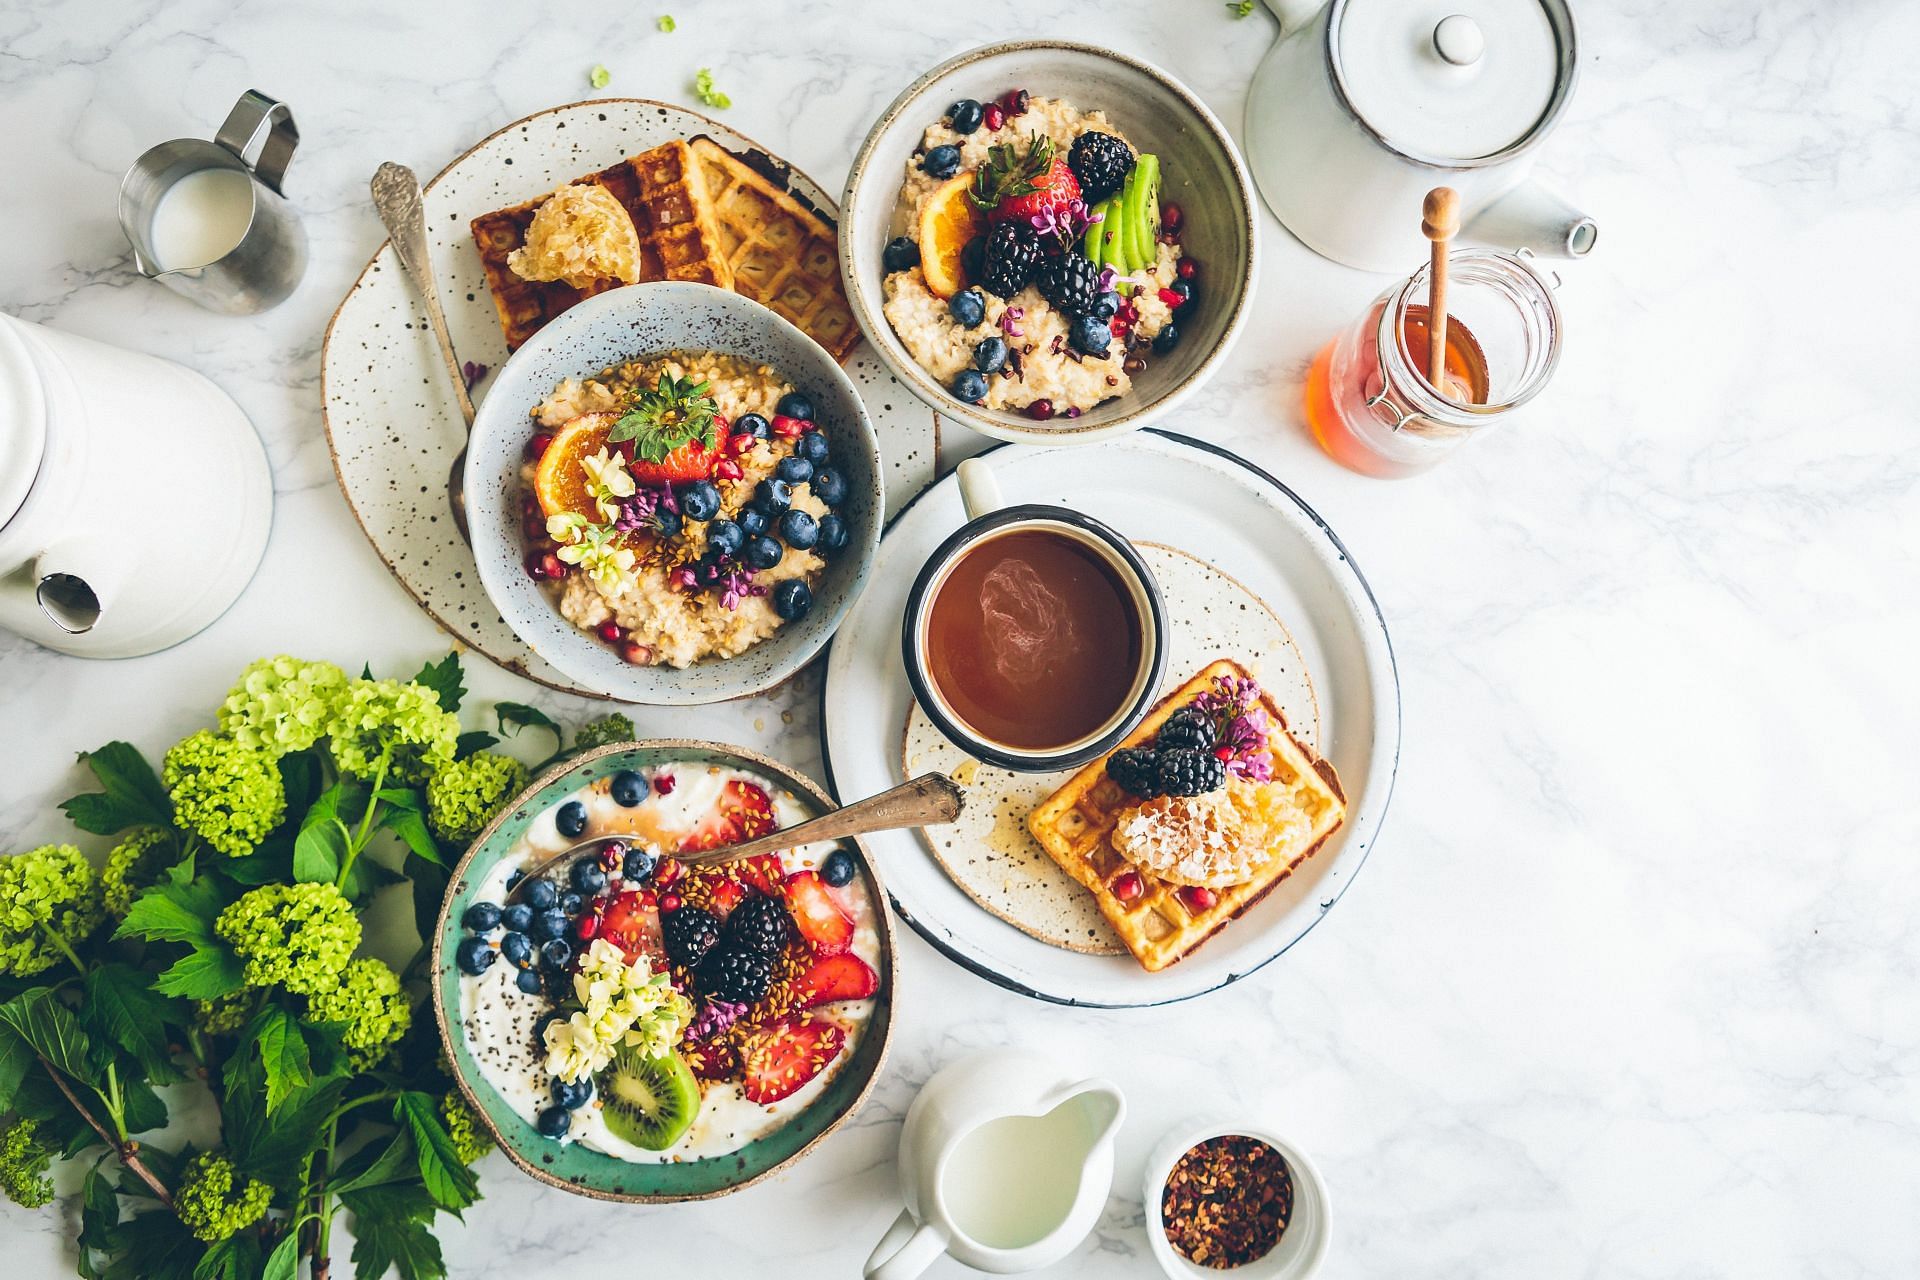 Diets for weight loss to follow this year (Image via Unsplash/Brooke Lark)